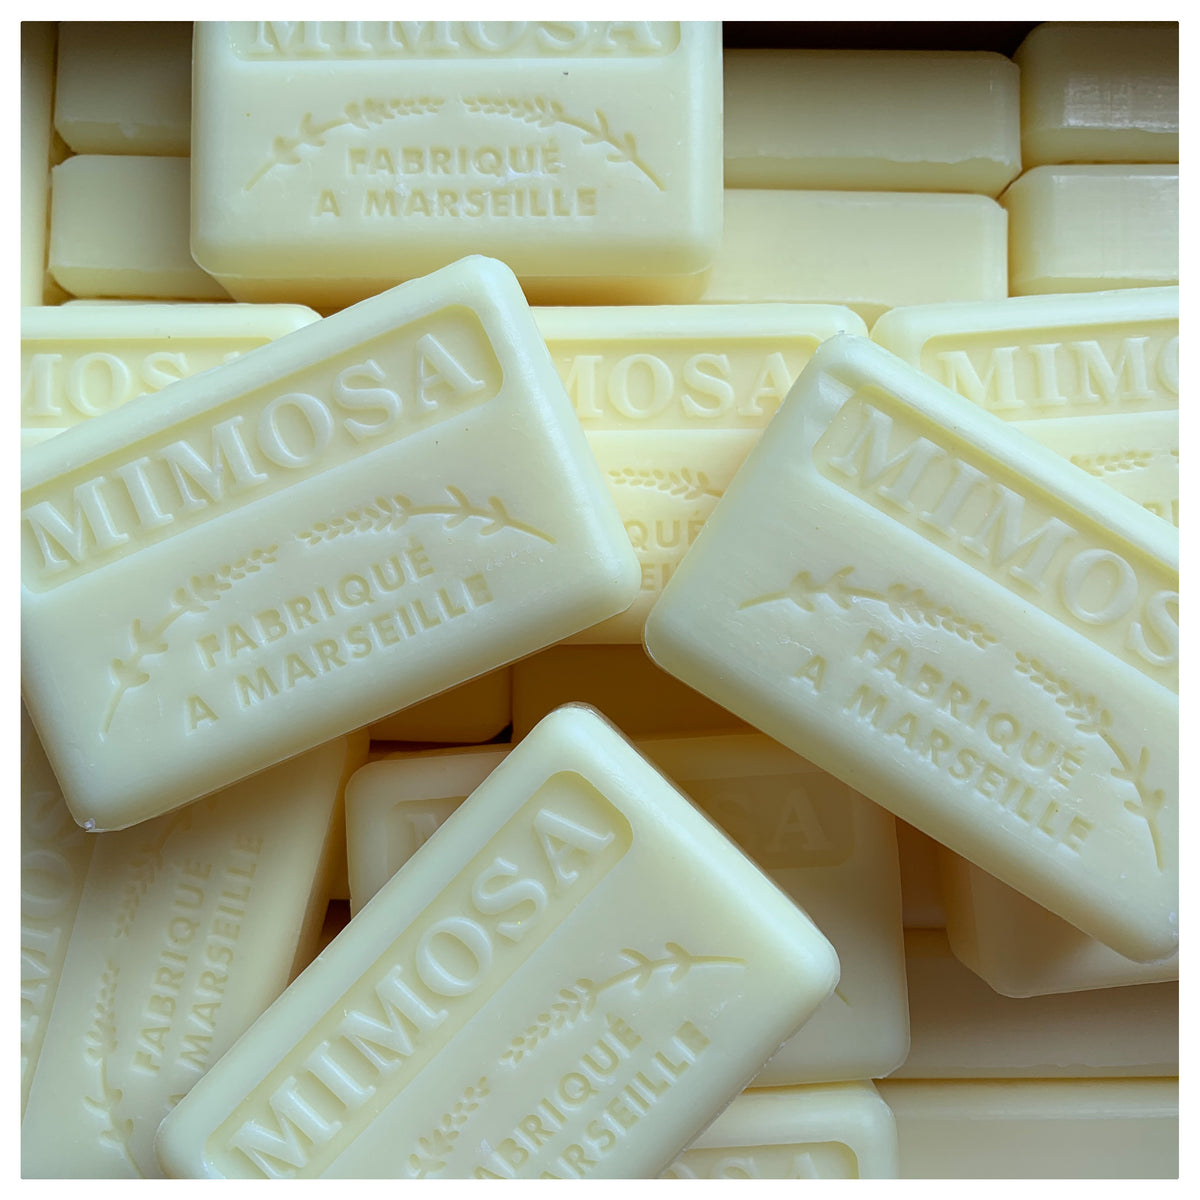 mimosa french soap